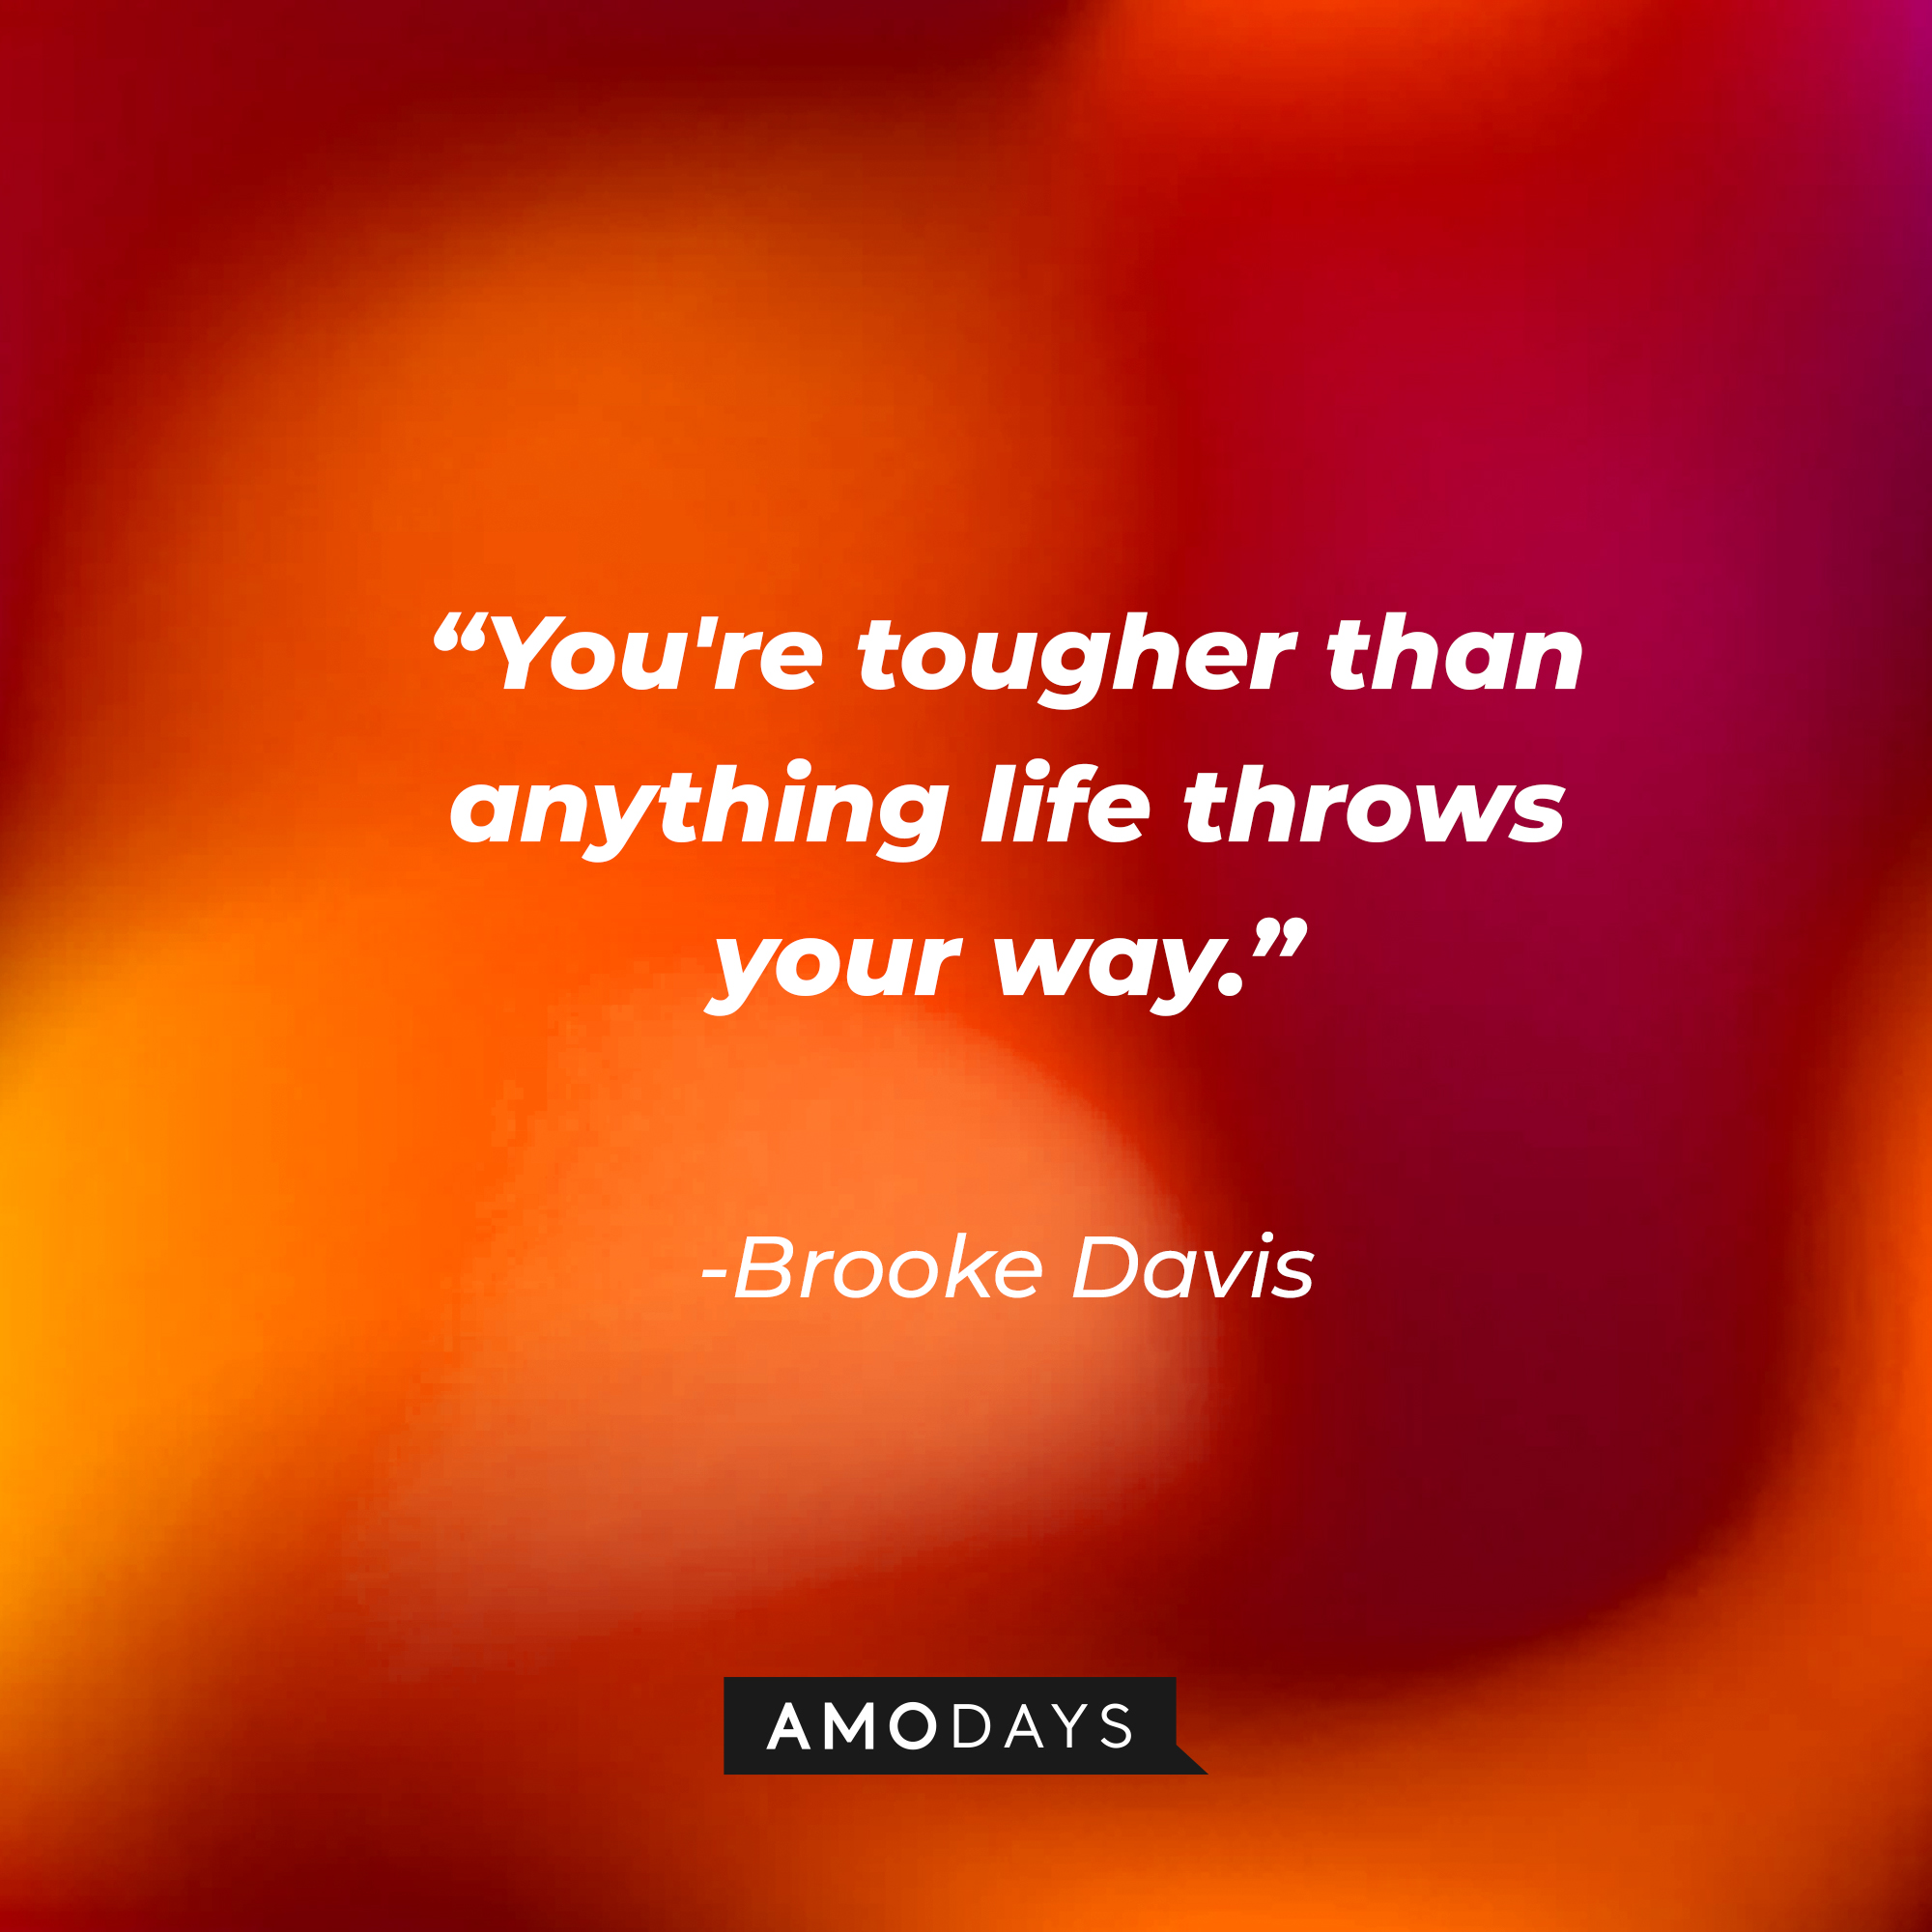 Brooke Davis’ quote: "You're tougher than anything life throws your way." | Source: AmoDays